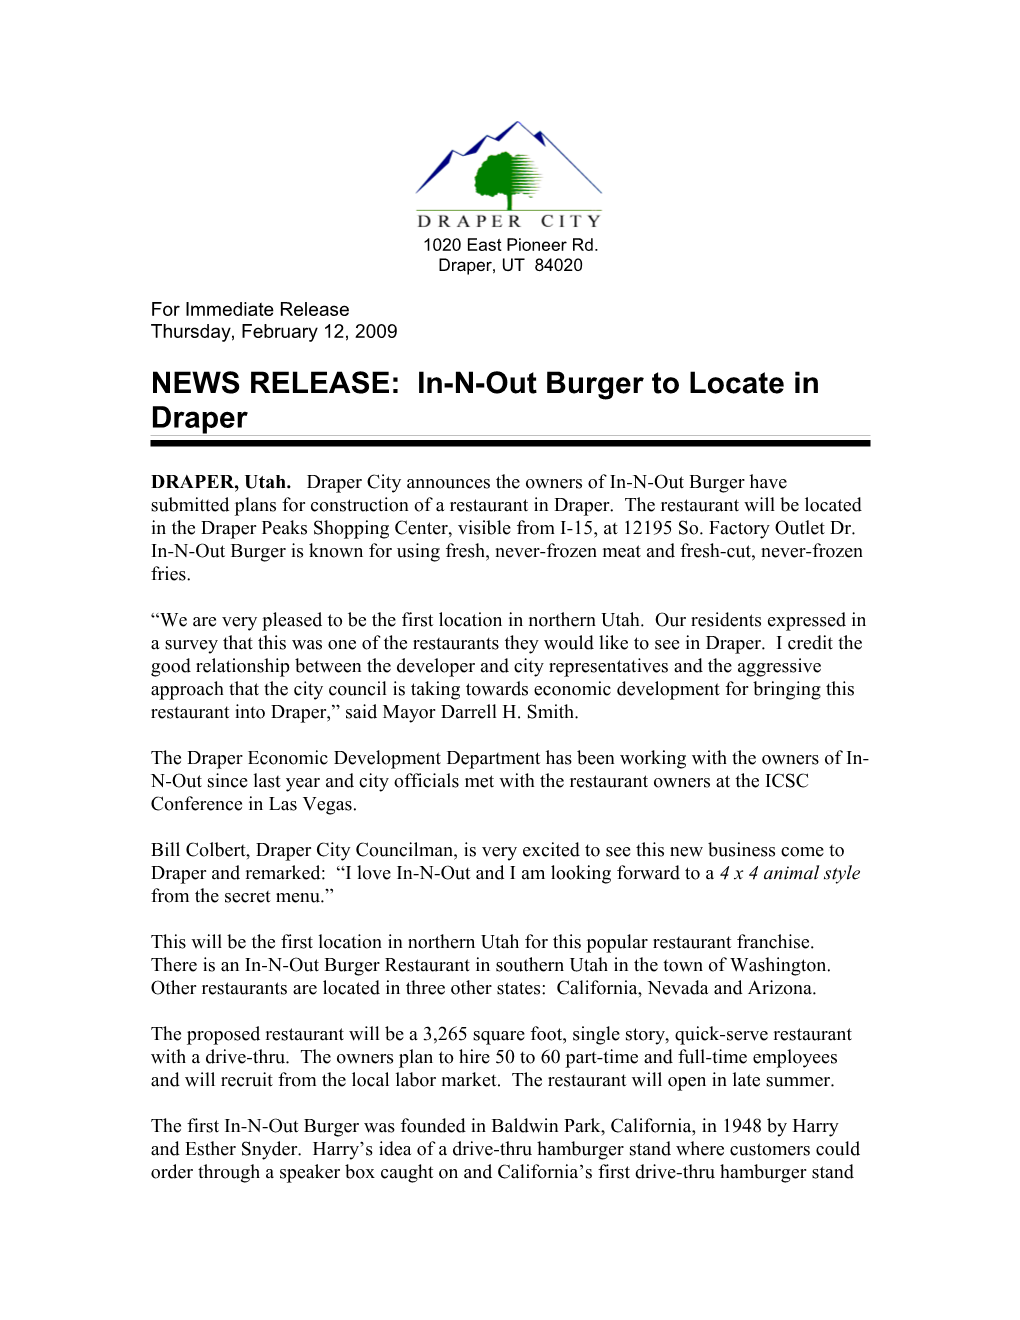 NEWS RELEASE: In-N-Out Burger to Locate in Draper